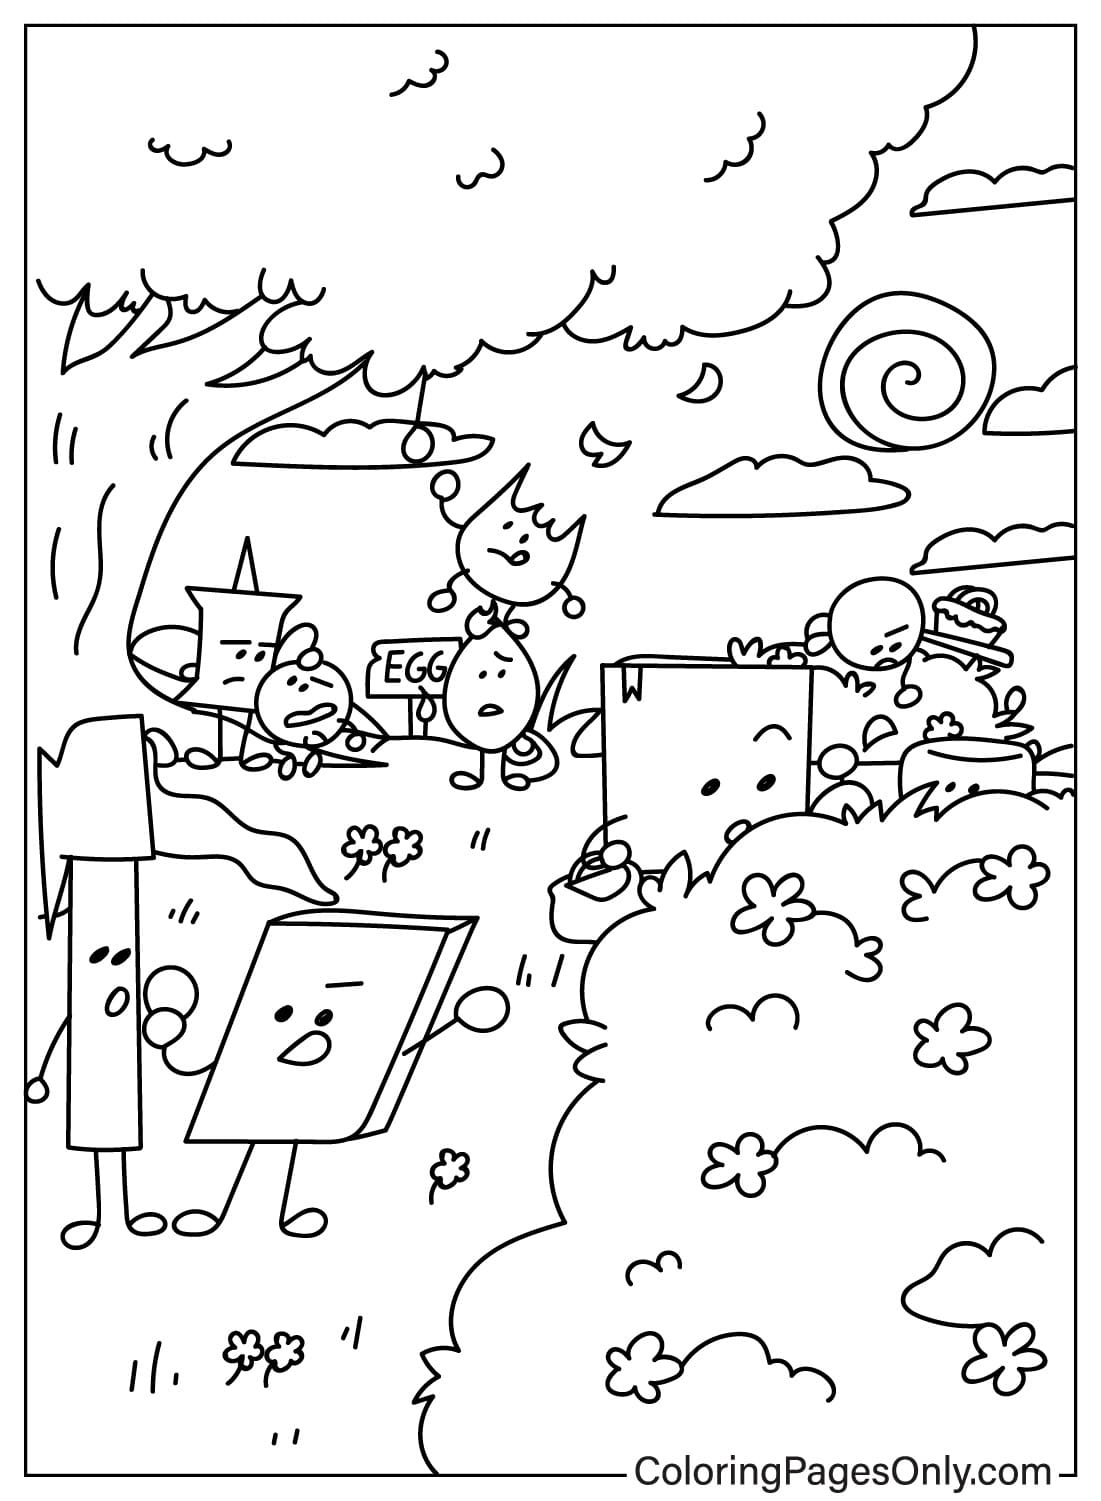 Dream Island Coloring Page to Printable ...